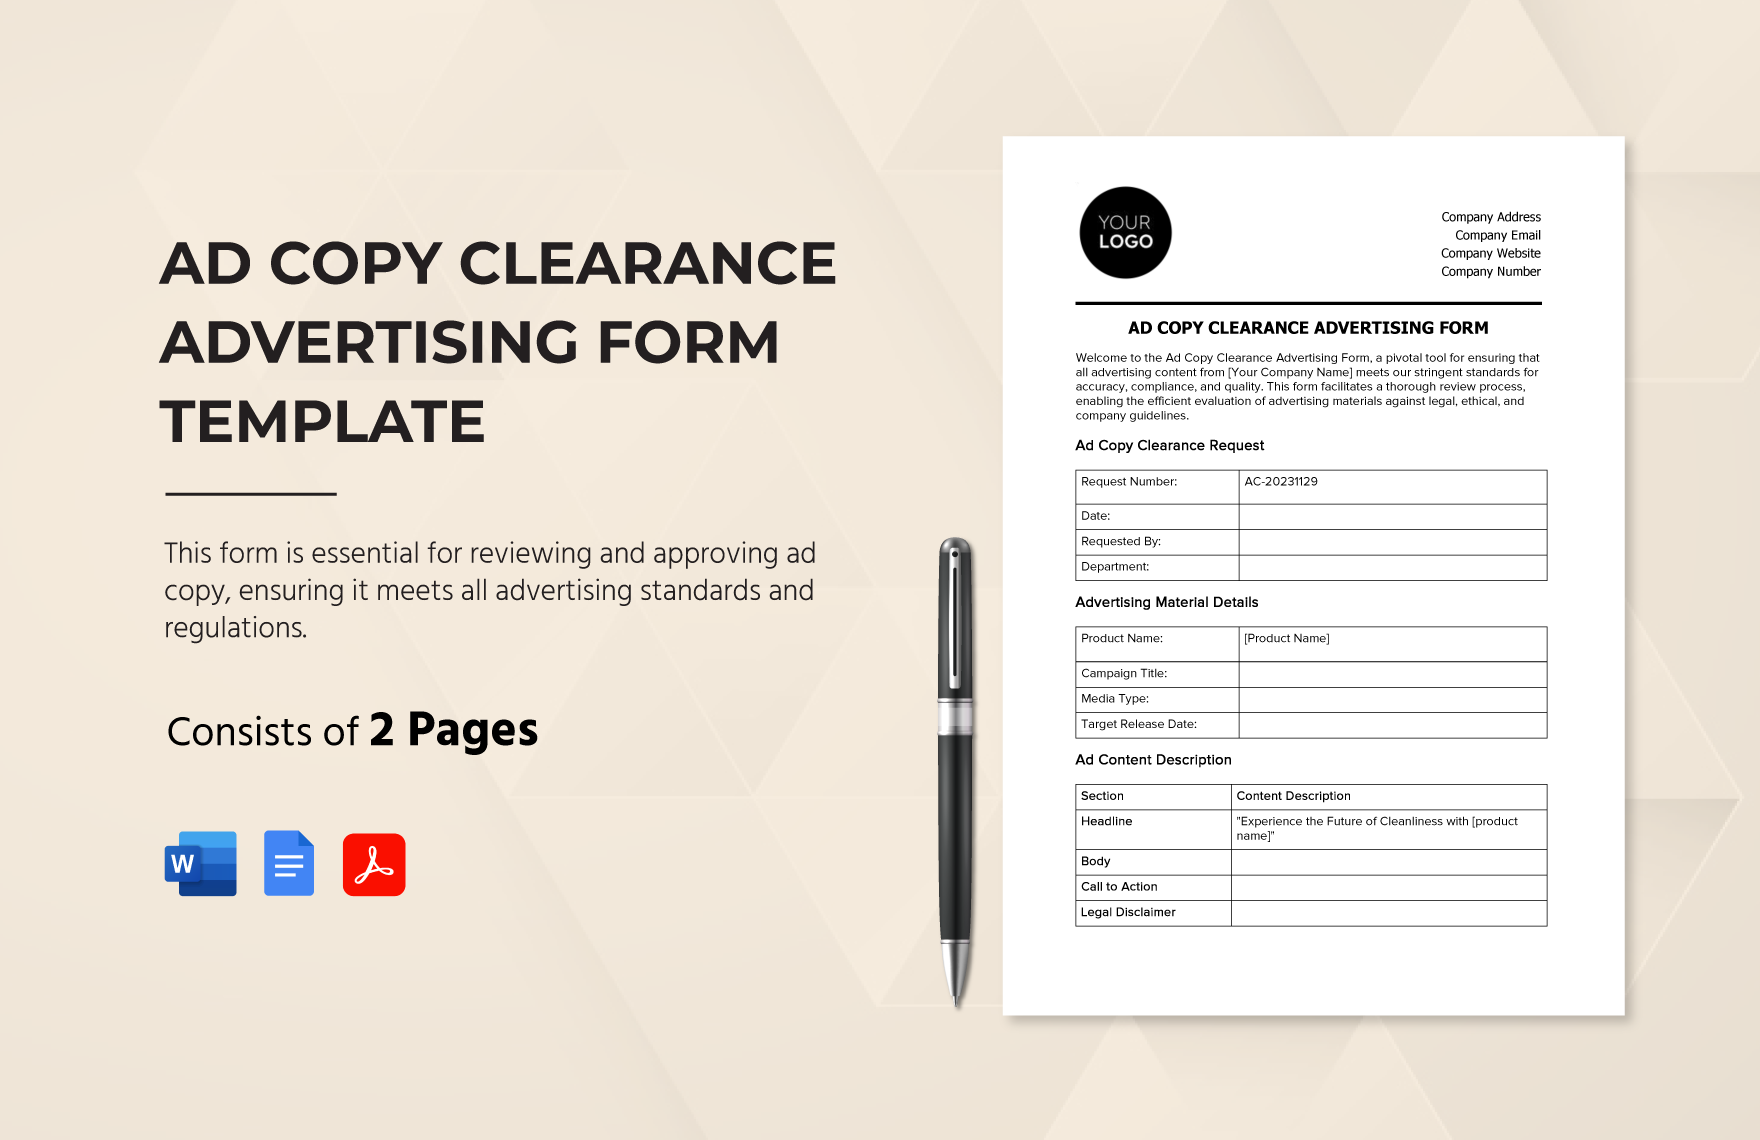 Ad Copy Clearance Advertising Form Template in Word, Google Docs, PDF